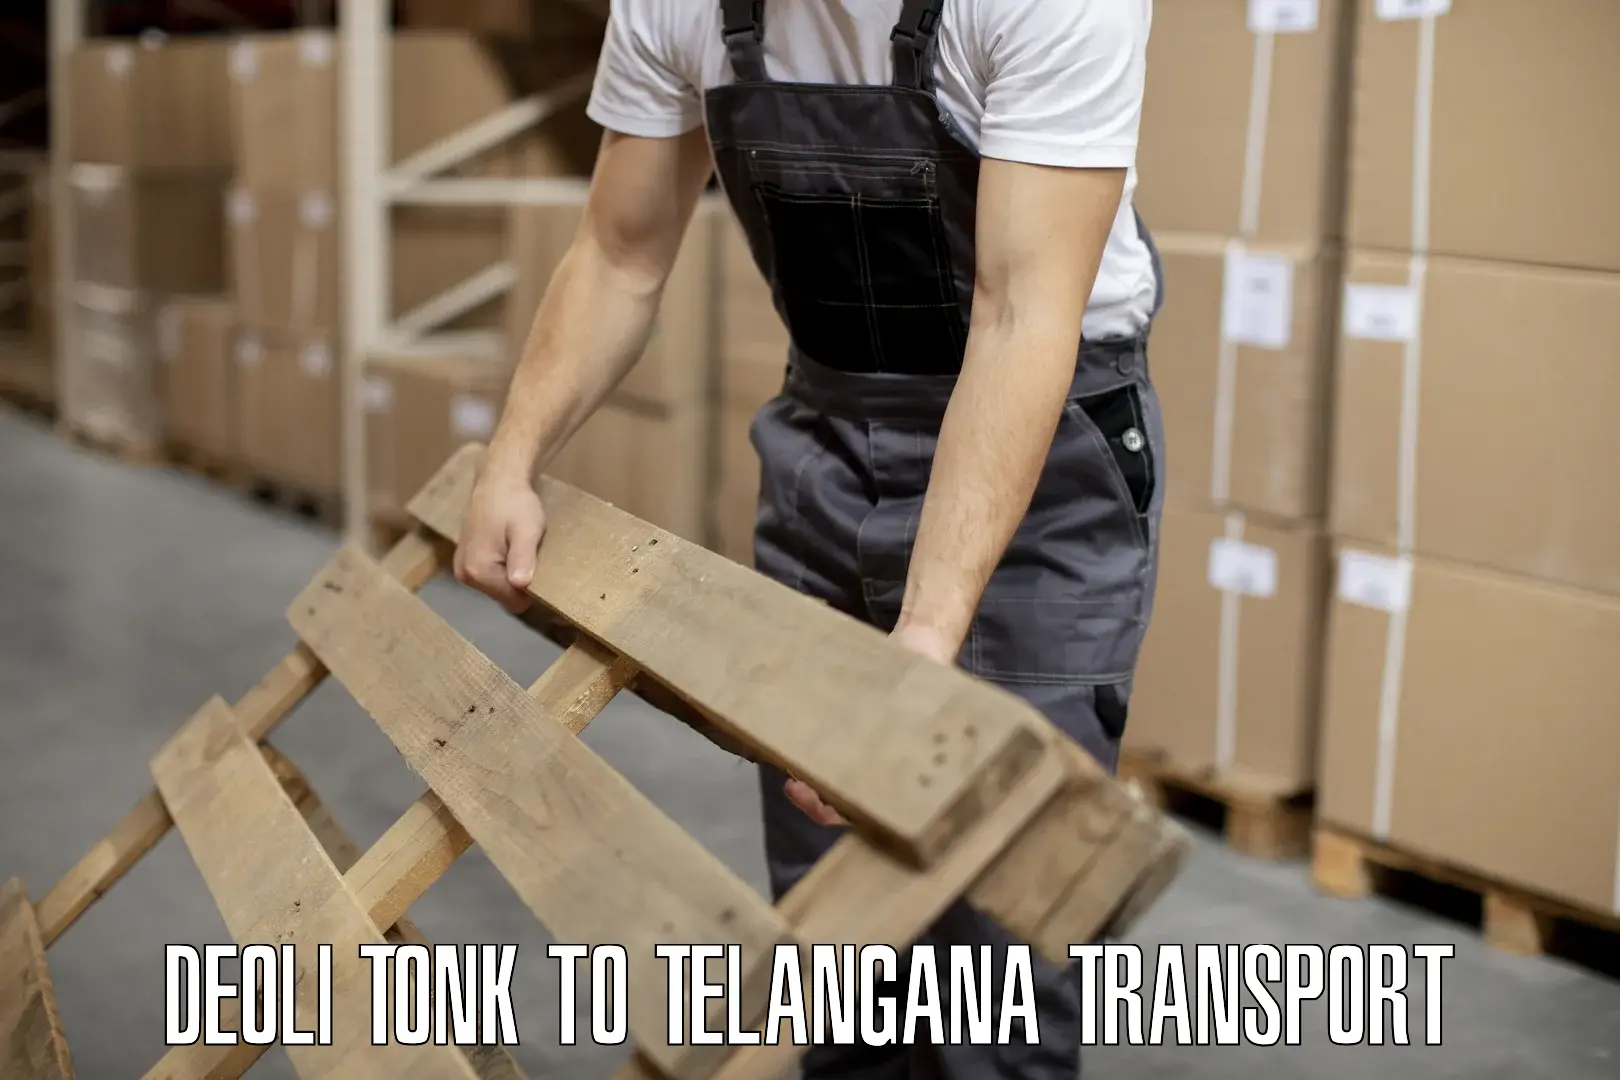 Truck transport companies in India Deoli Tonk to Manneguda